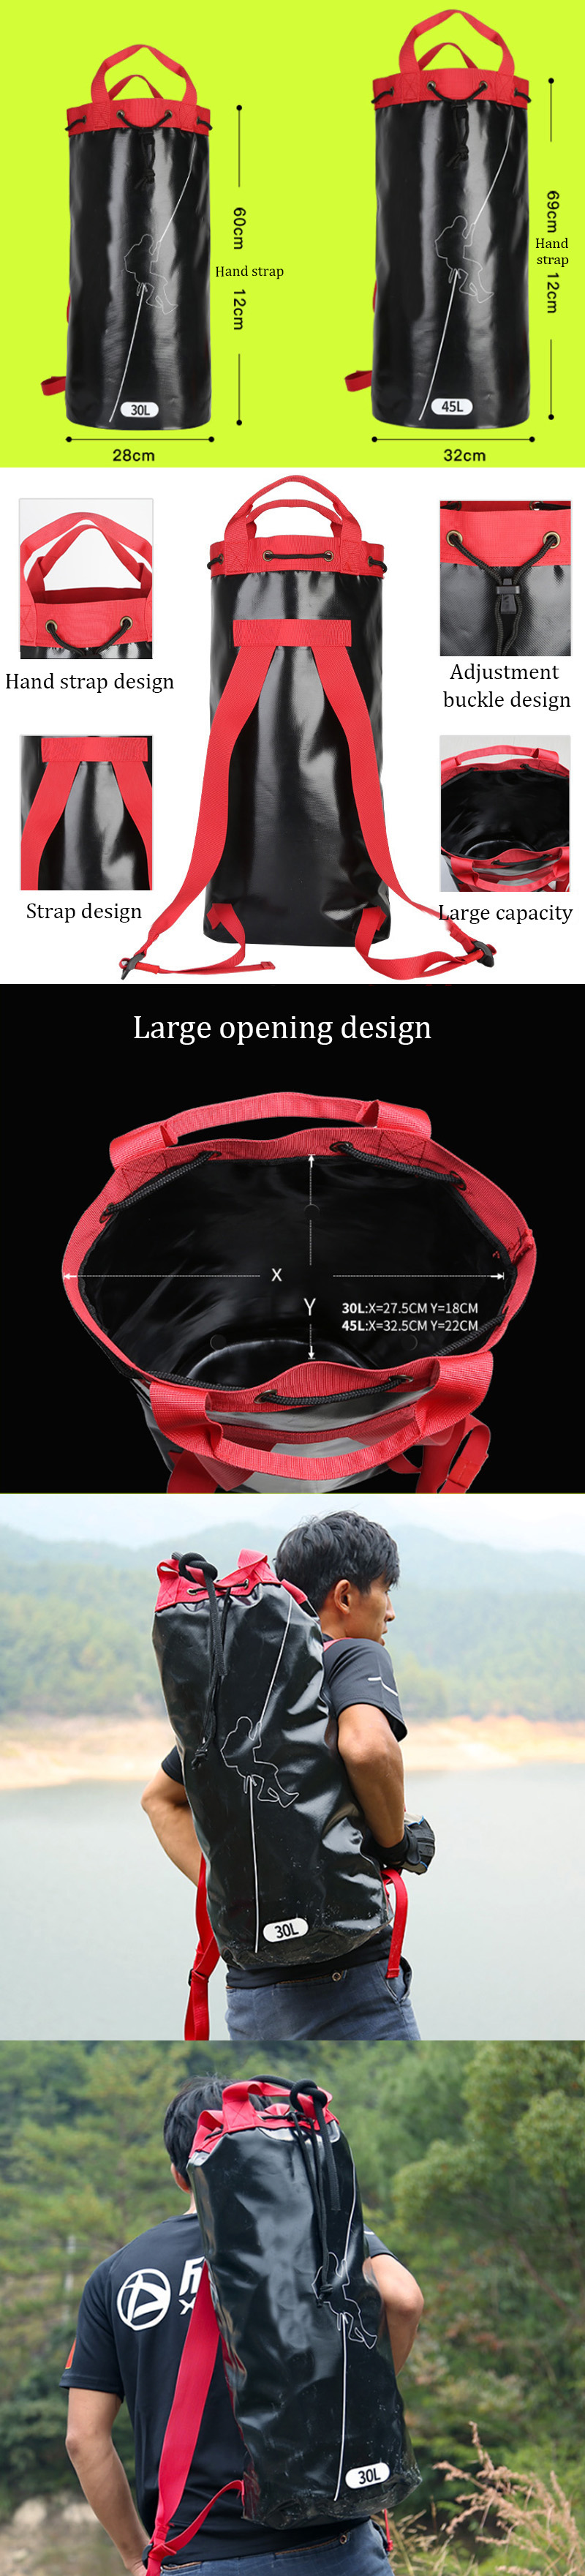 3045L-Outdoor-Hiking-Rock-Climbing-Speed-down-Backpack-Storage-Rope-Bags-Sports-Pack-1416669-1